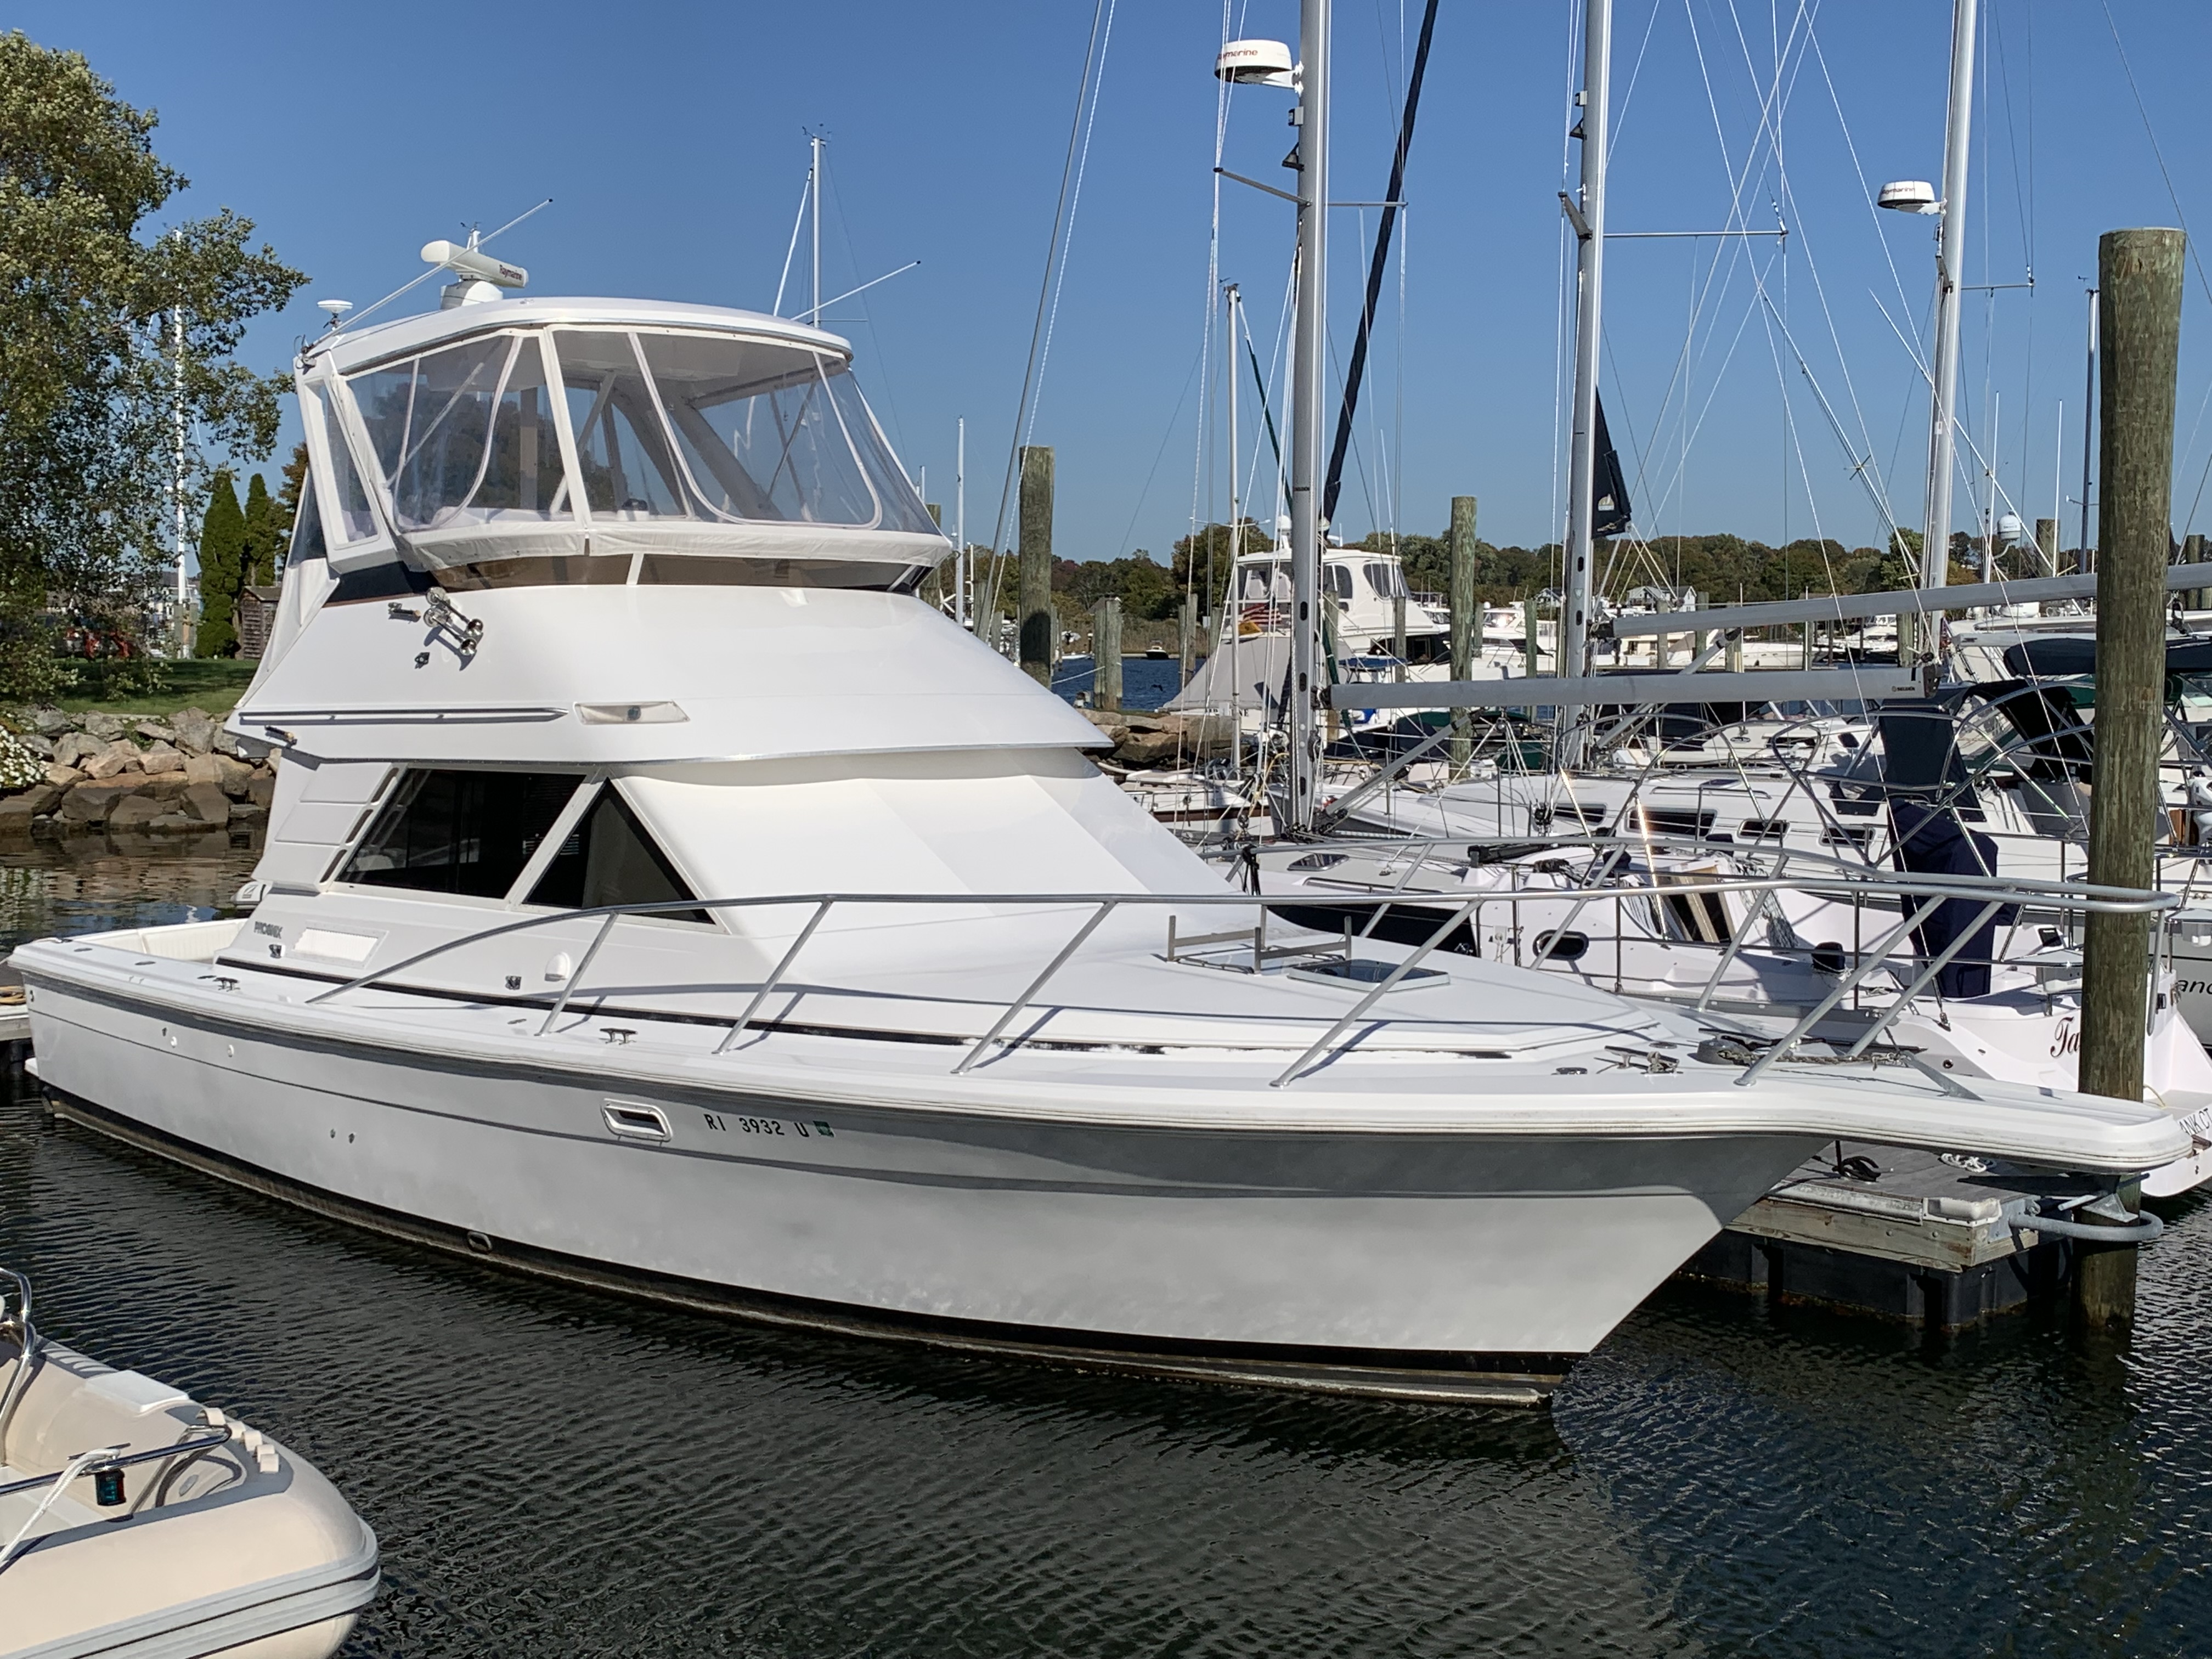 Tournament Yacht Sales, 1986  Boats for sale, Sport fishing boats